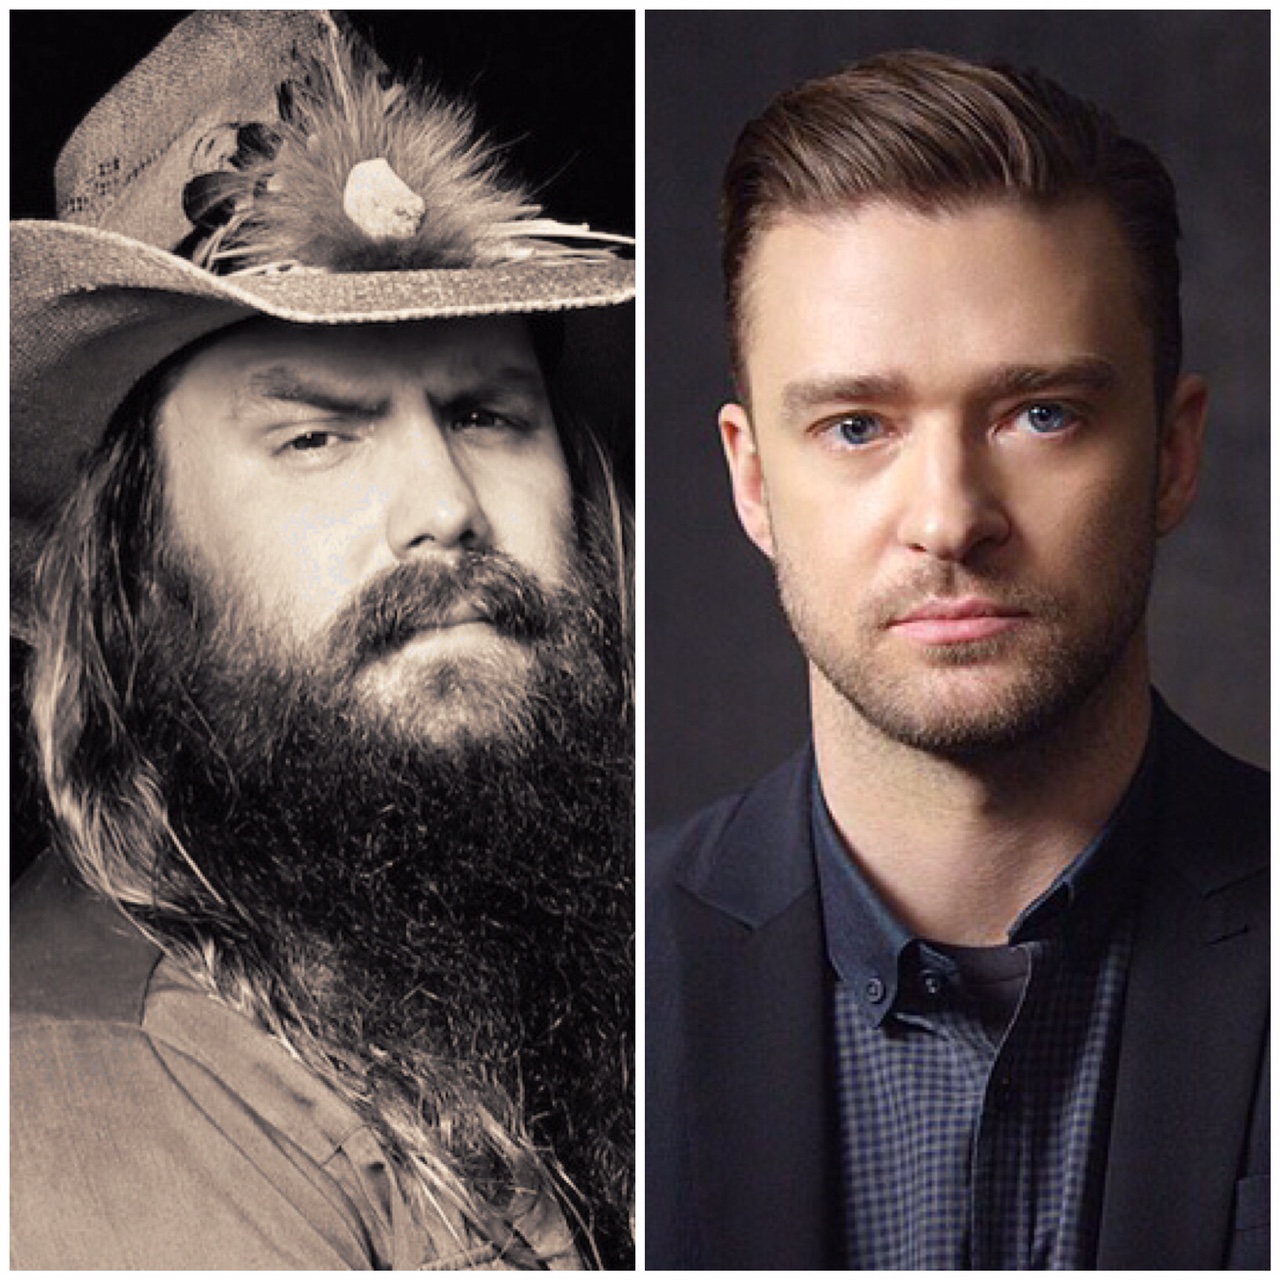 Chris Stapleton and Justin Timberlake To Perform Together at the 49th